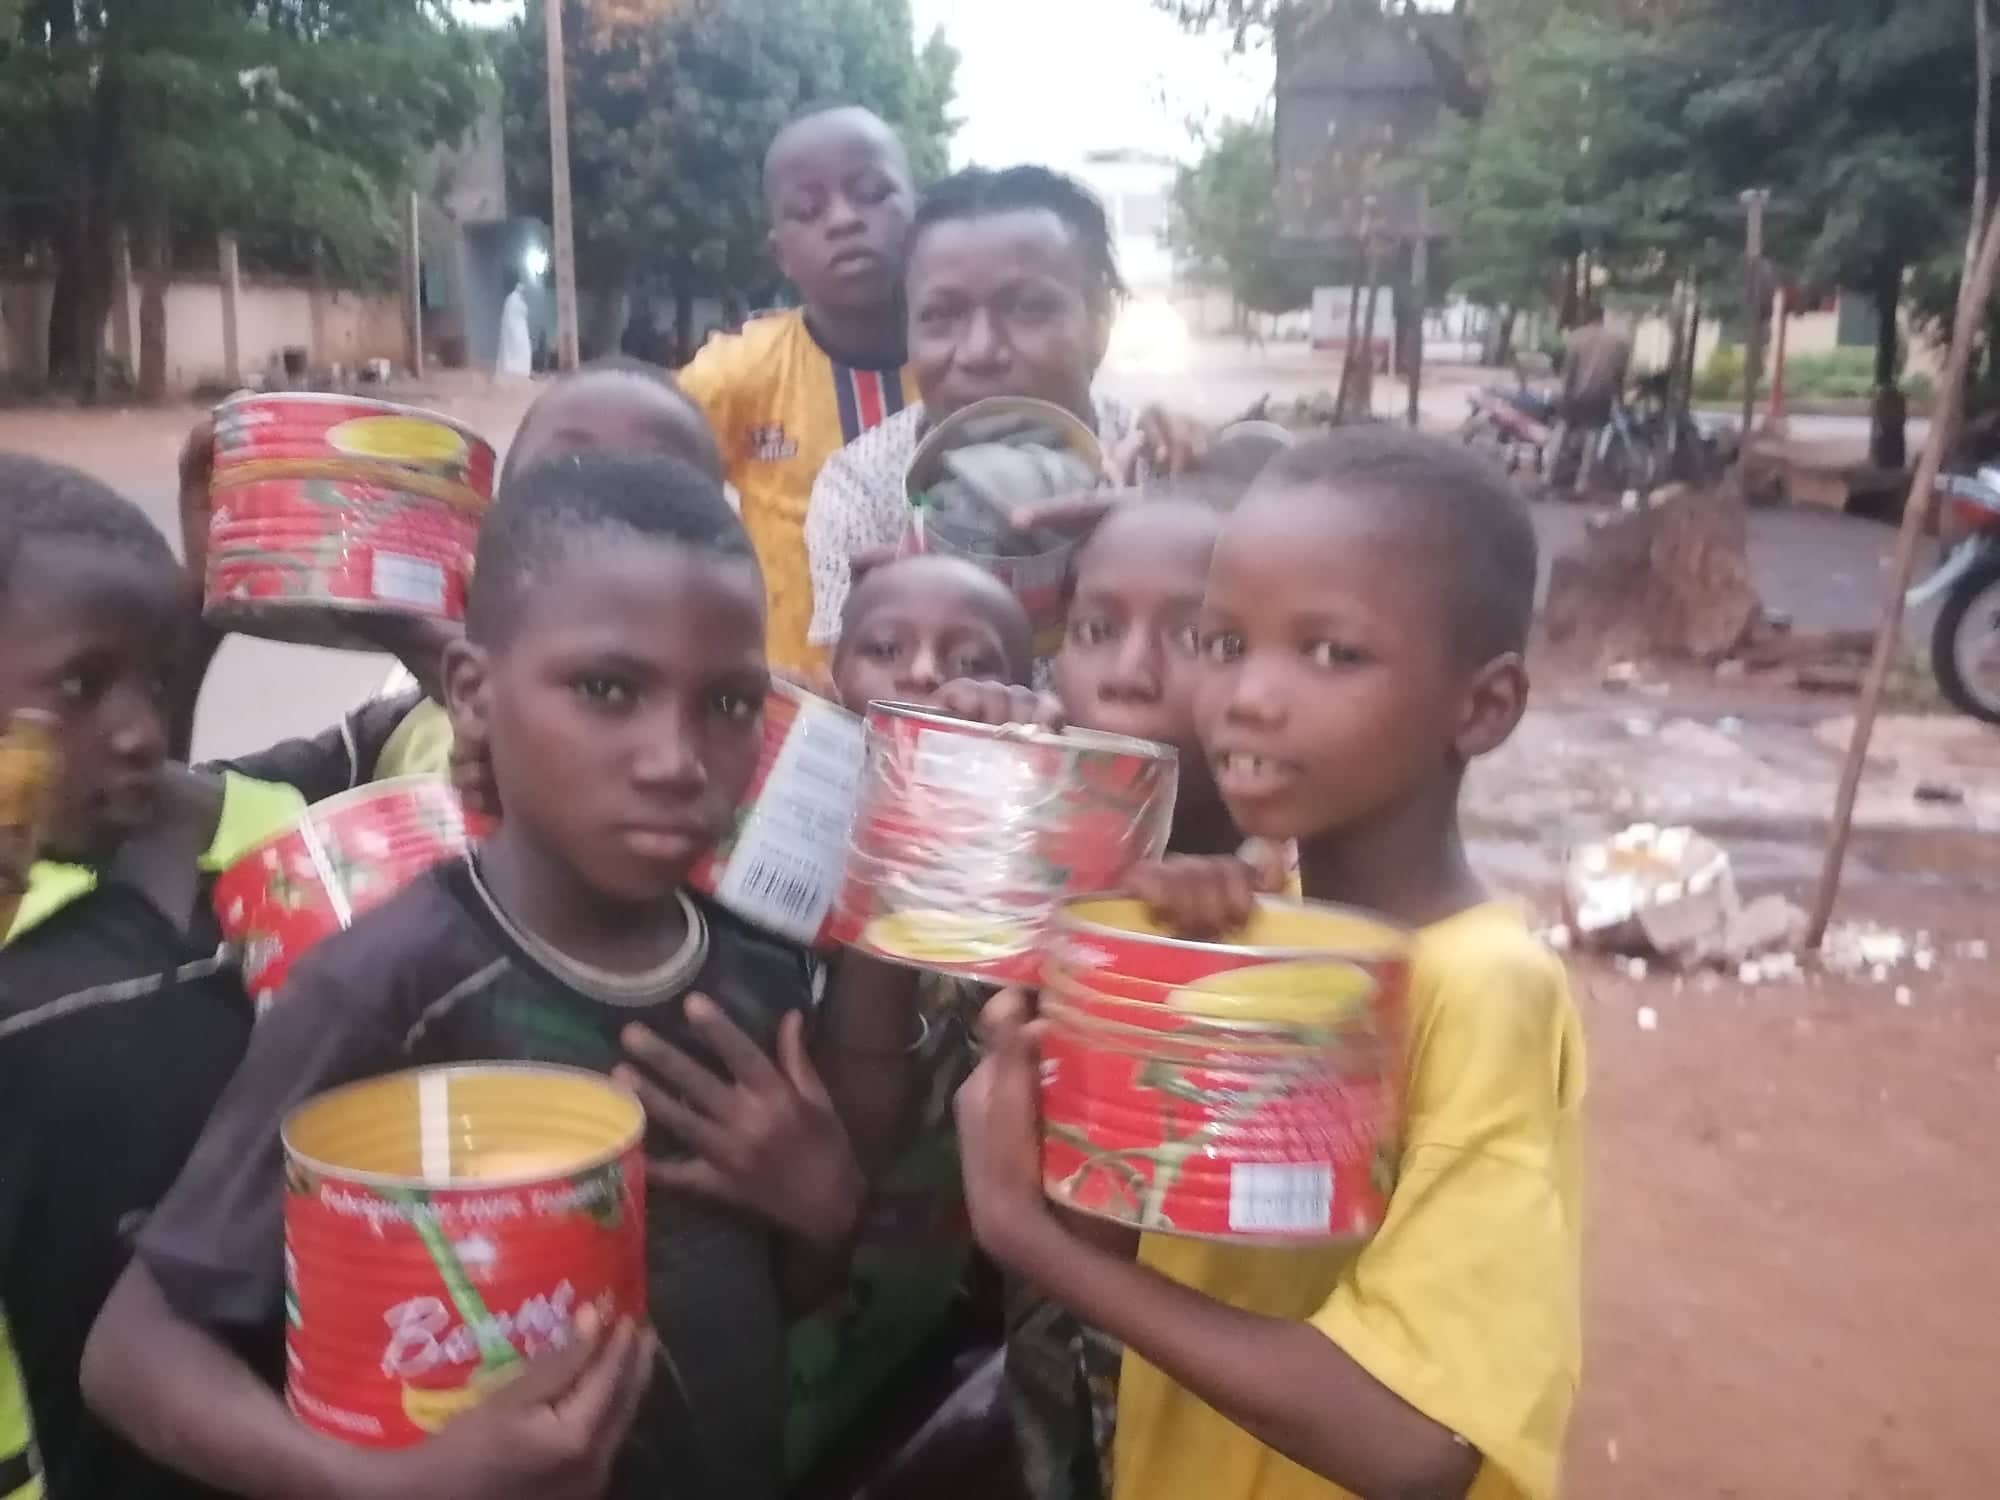 Group of boys with red tomato paste tins with man on unpaved, tree lined street